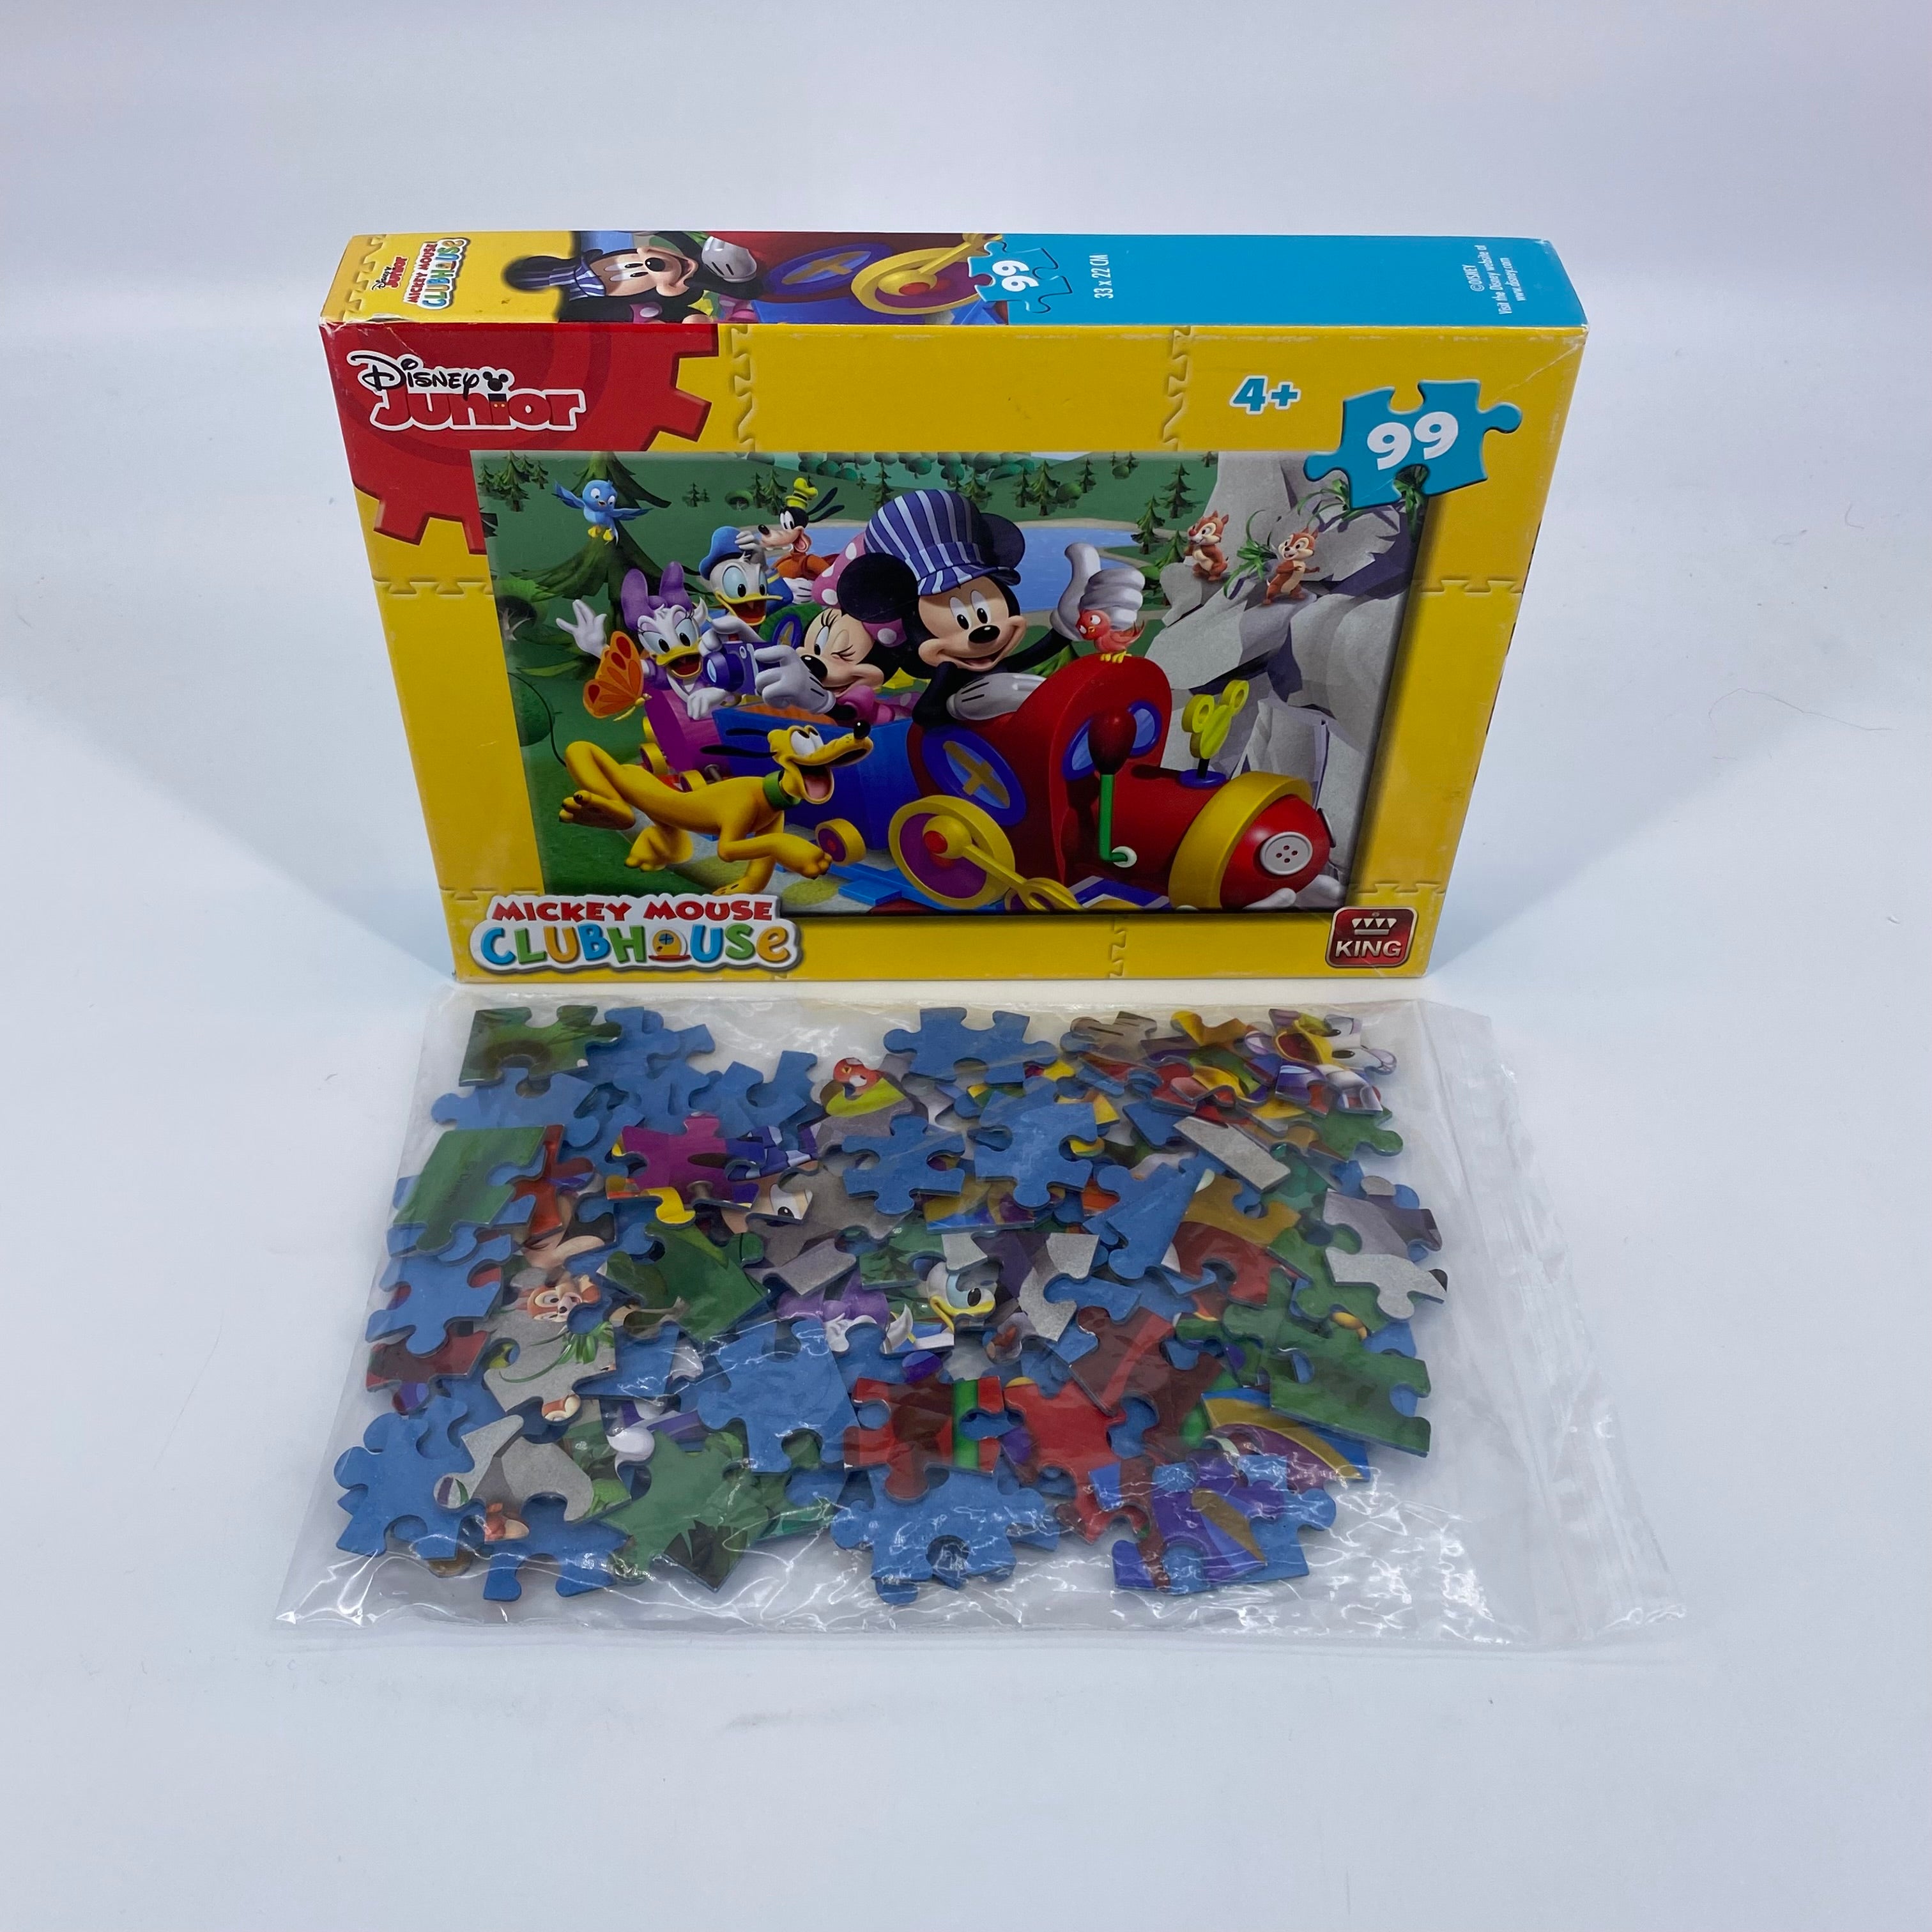 Puzzle Disney - Mickey Mouse Club House - 99 Pièces